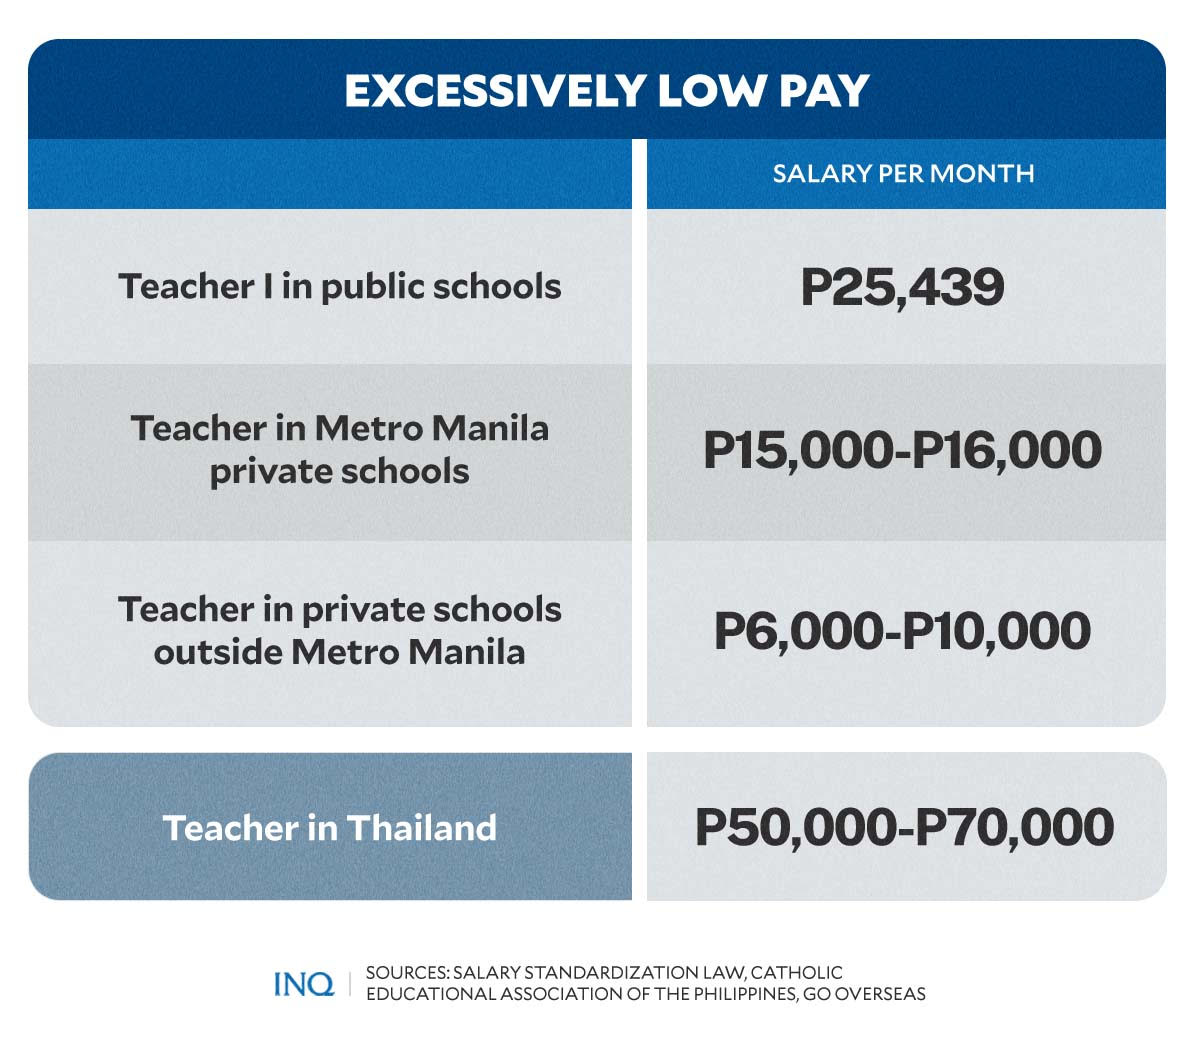 Excessively low pay for teachers